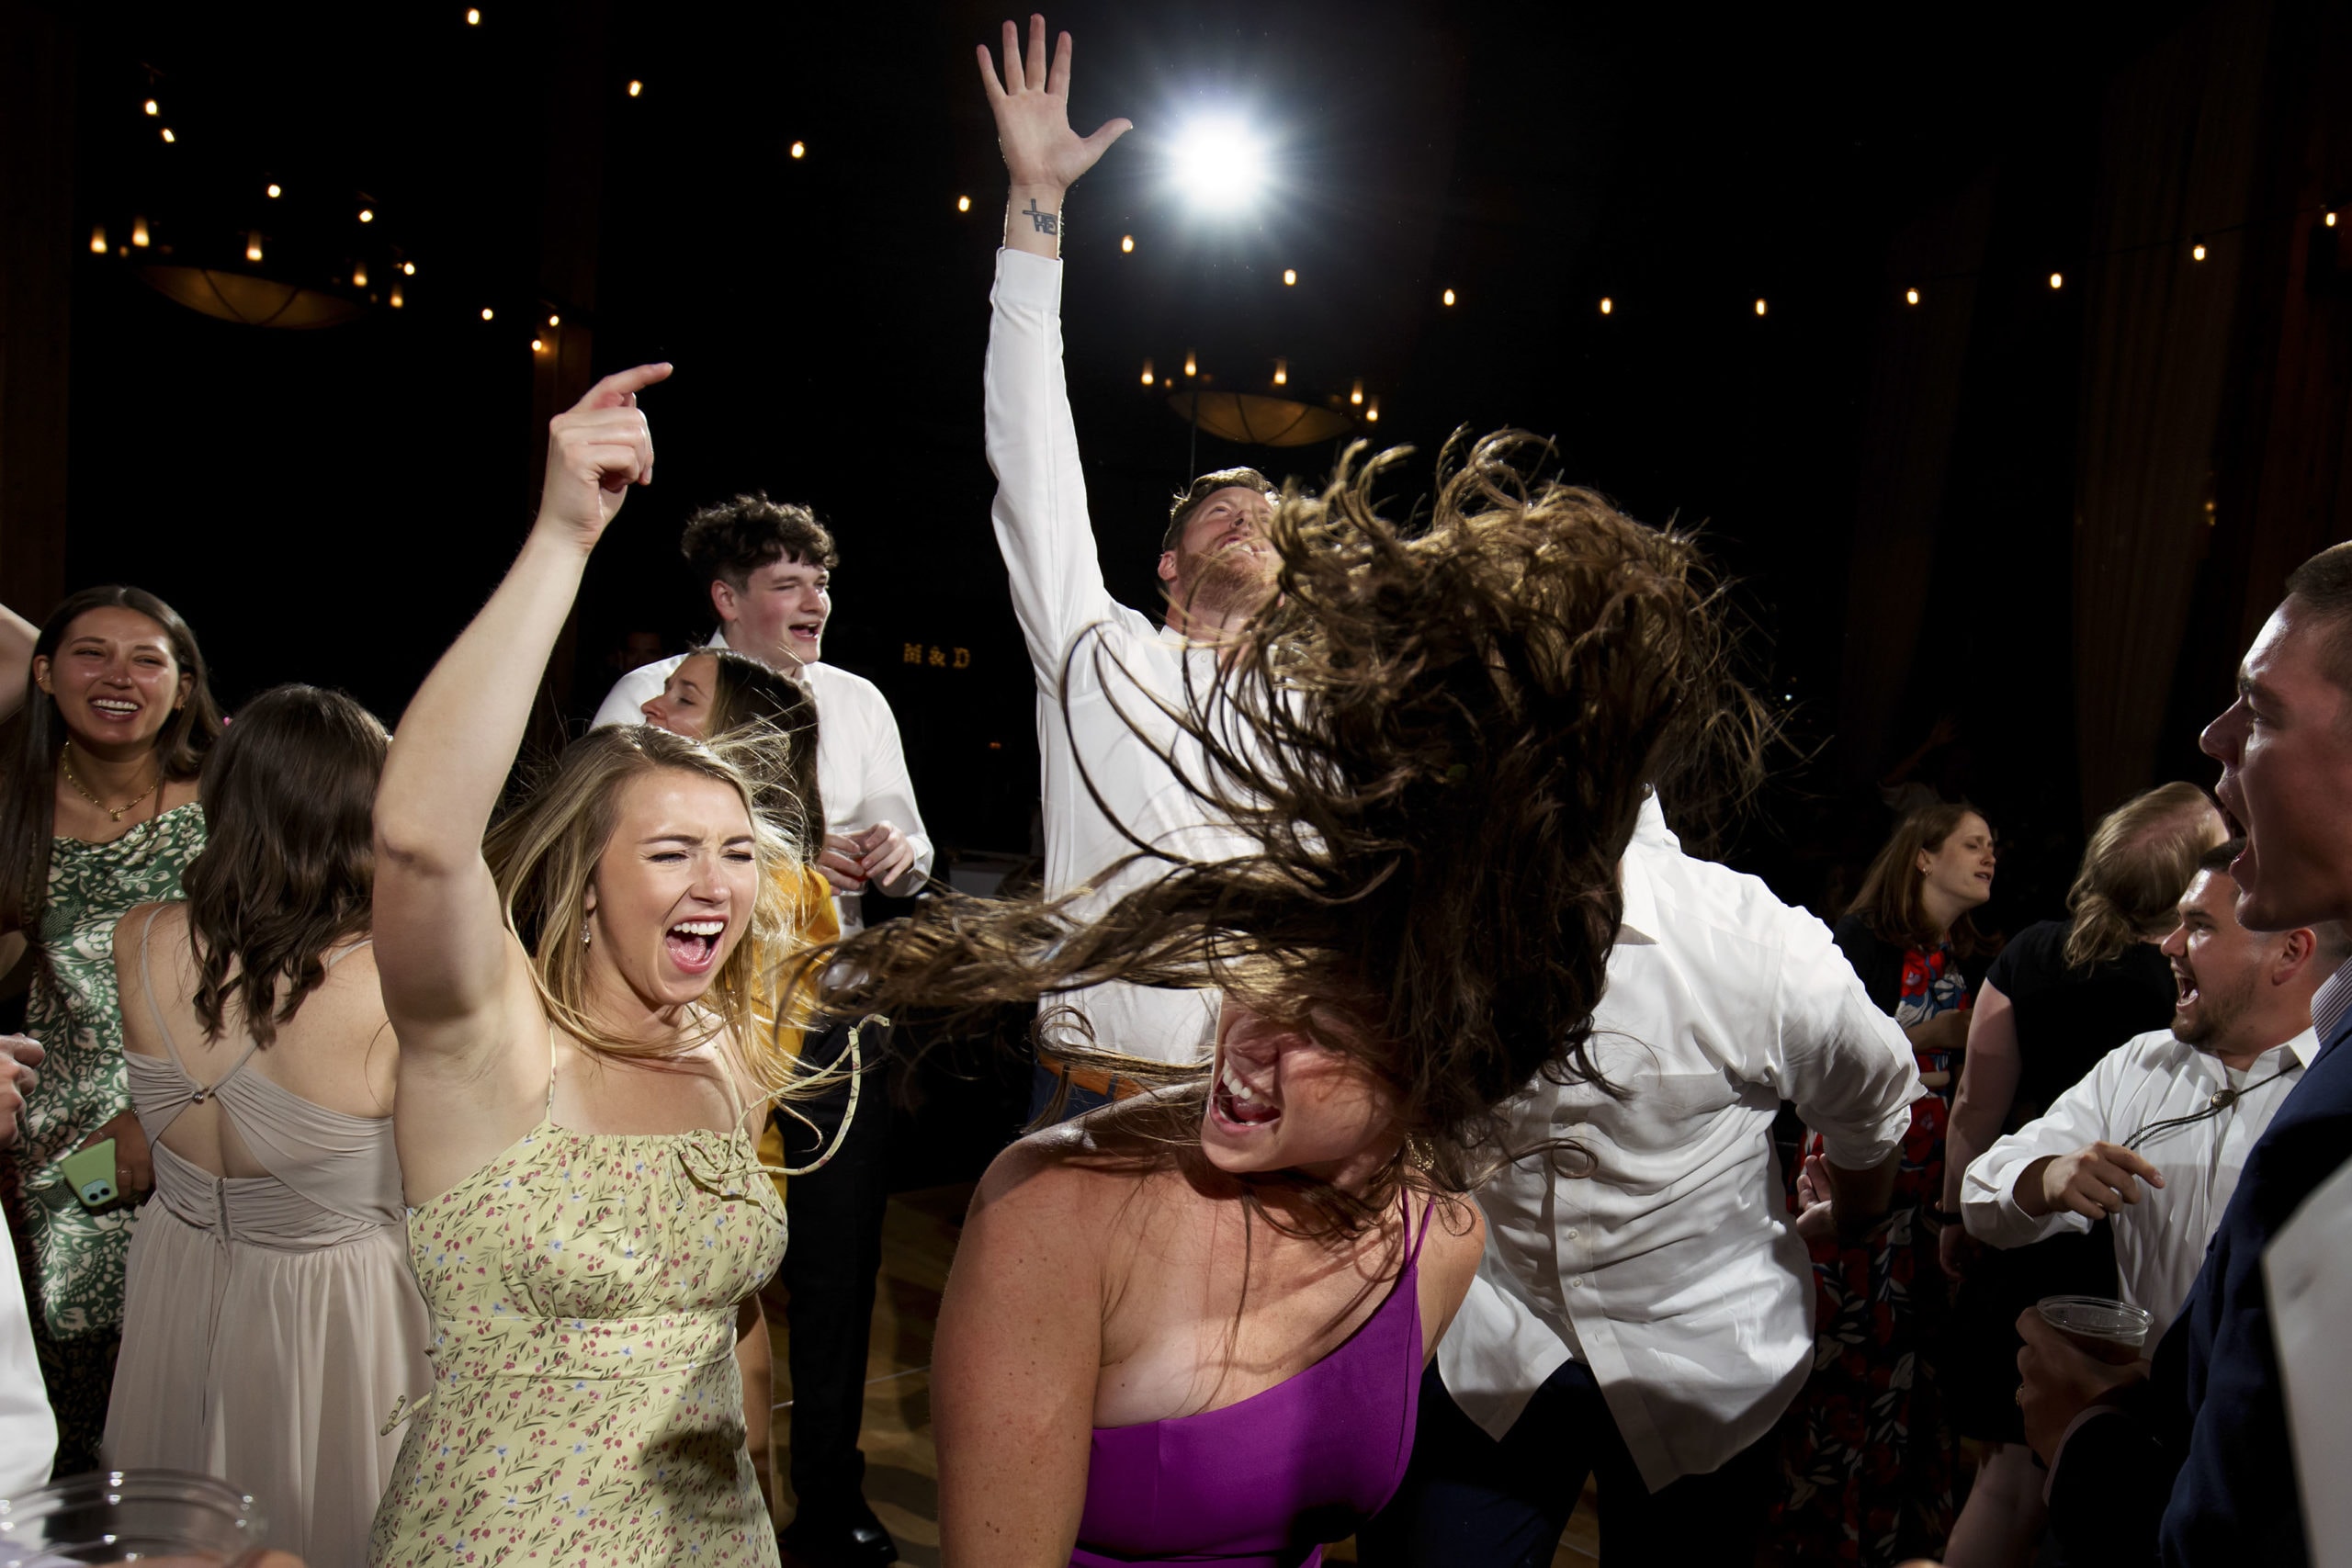 Guests dance during a wedding reception in the Grand Hall at Copper Station